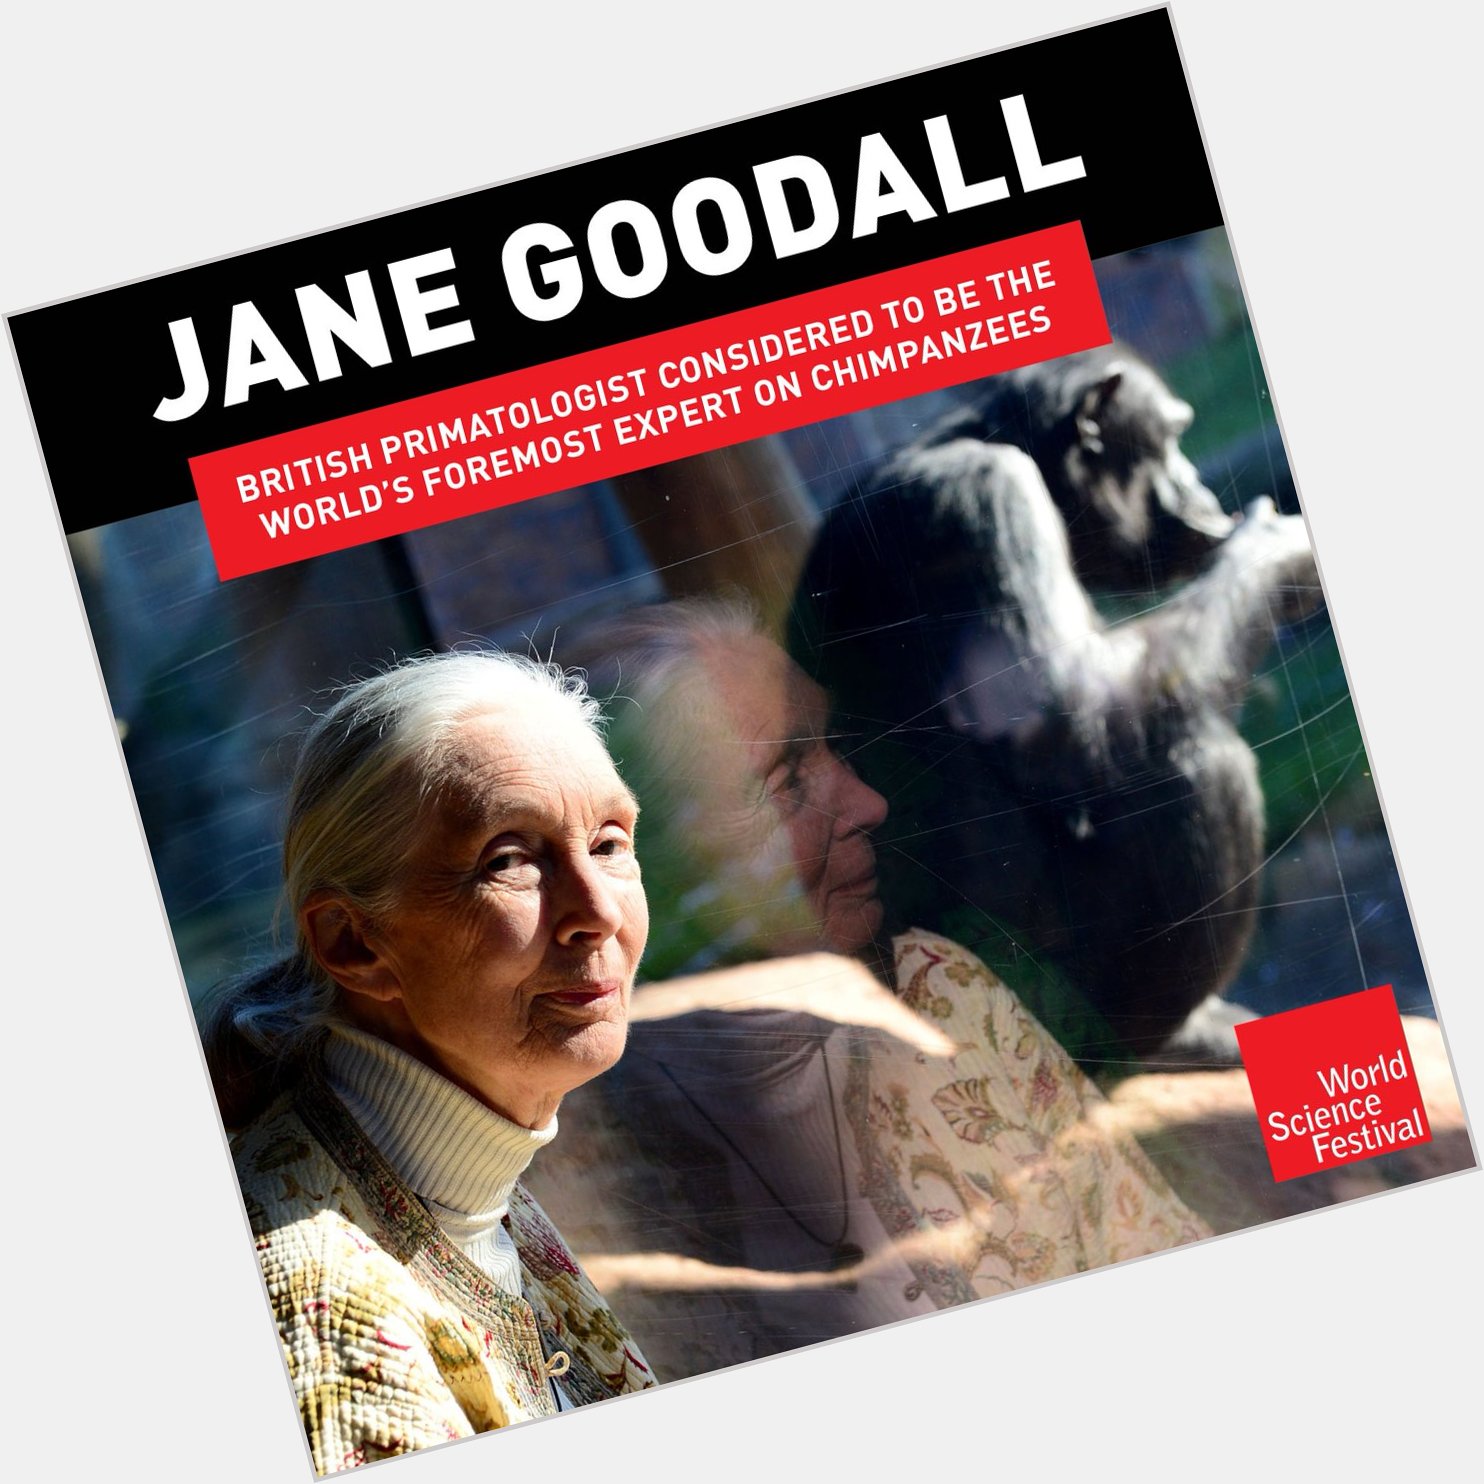 Happy birthday to the incredible Jane Goodall! 